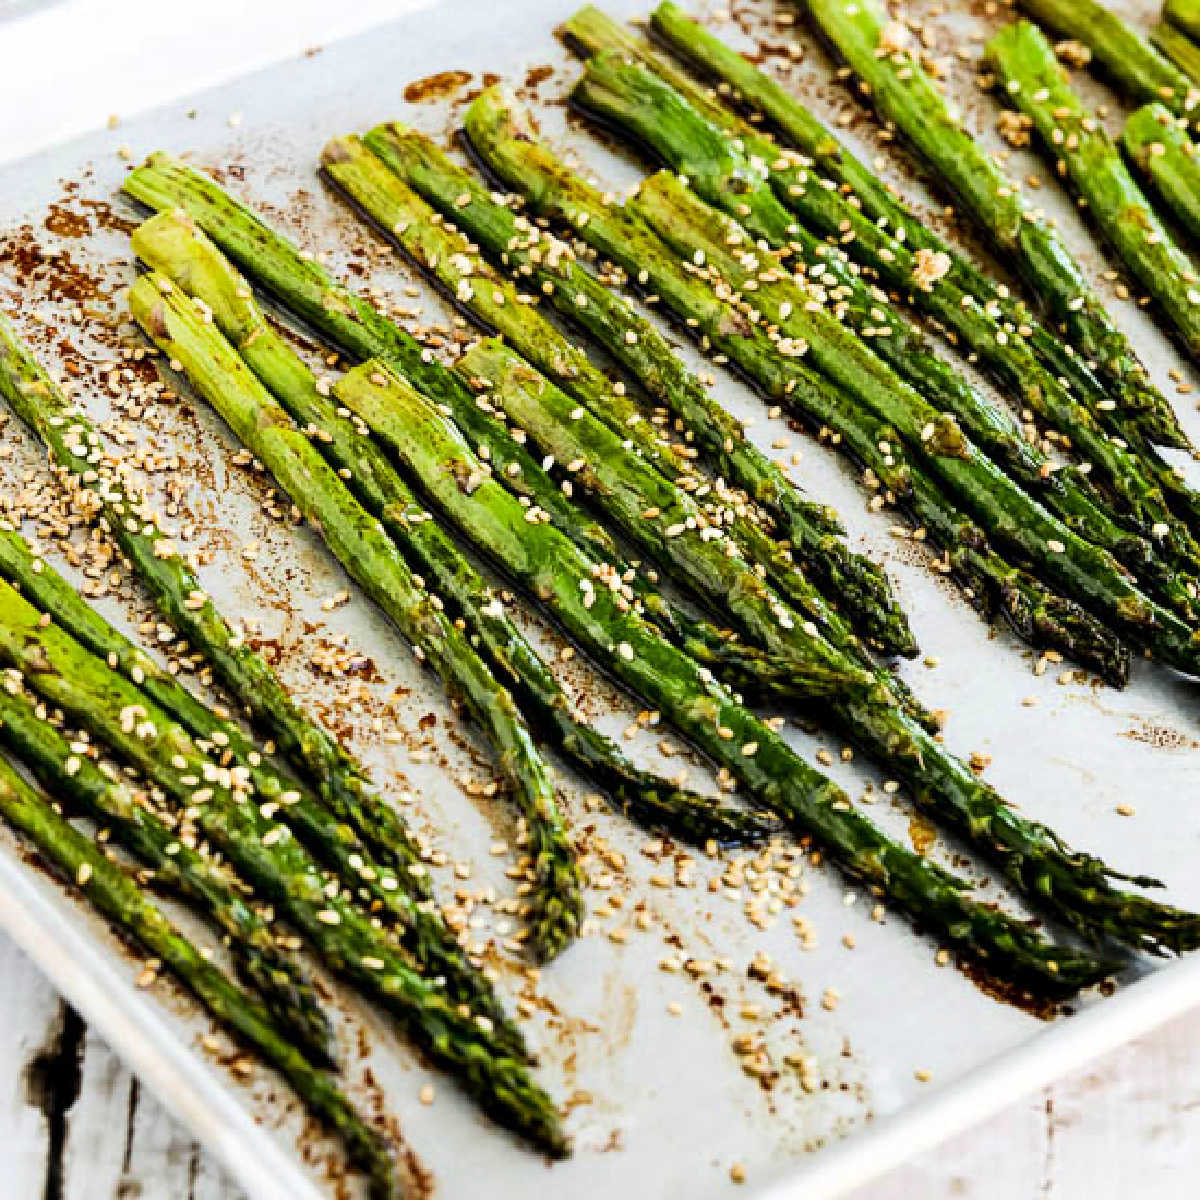 Square image of Asparagus with Soy-Sesame Glaze shown on roasting pan.